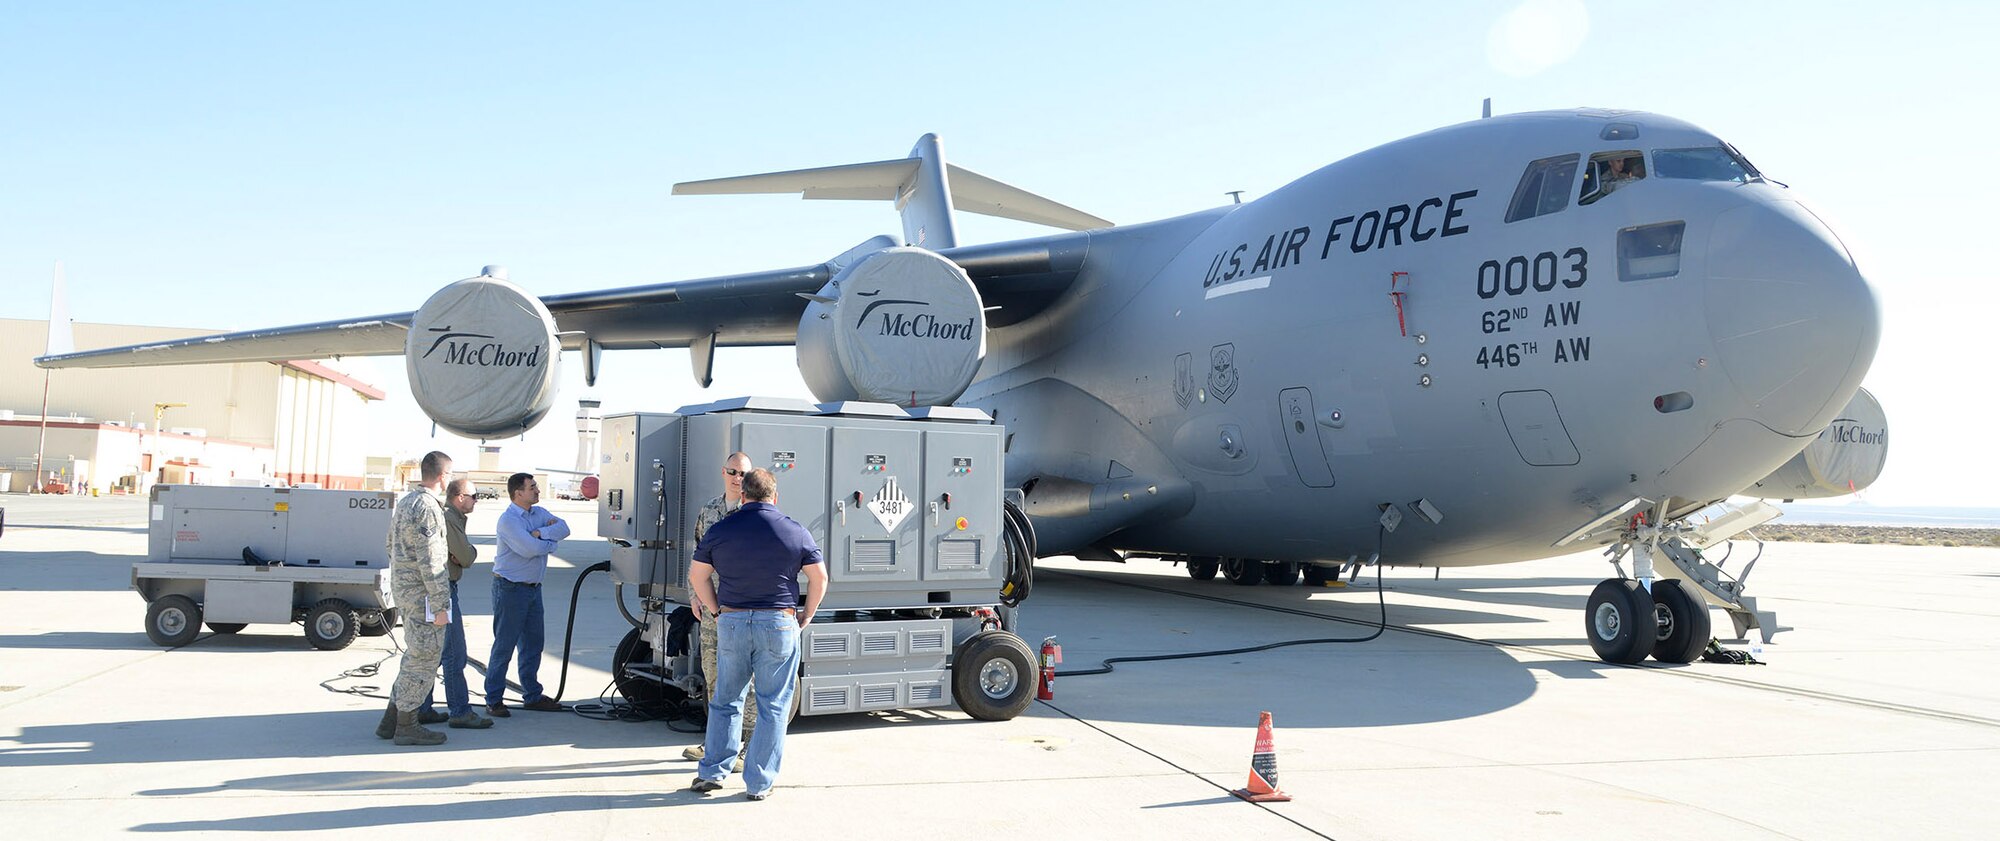 The test team monitors the HEF during the C-17 portion of the Hybrid Electric Flightline Cart Technology Pathfinder tests. The HEF was a concept demonstrator built to explore an all-electric or hybrid electrical power supply for use by flightline maintainers. Some possible advantages are lower noise, less emissions and less maintenance than the diesel generators currently in use. (U.S. Air Force photo by Christopher Ball)